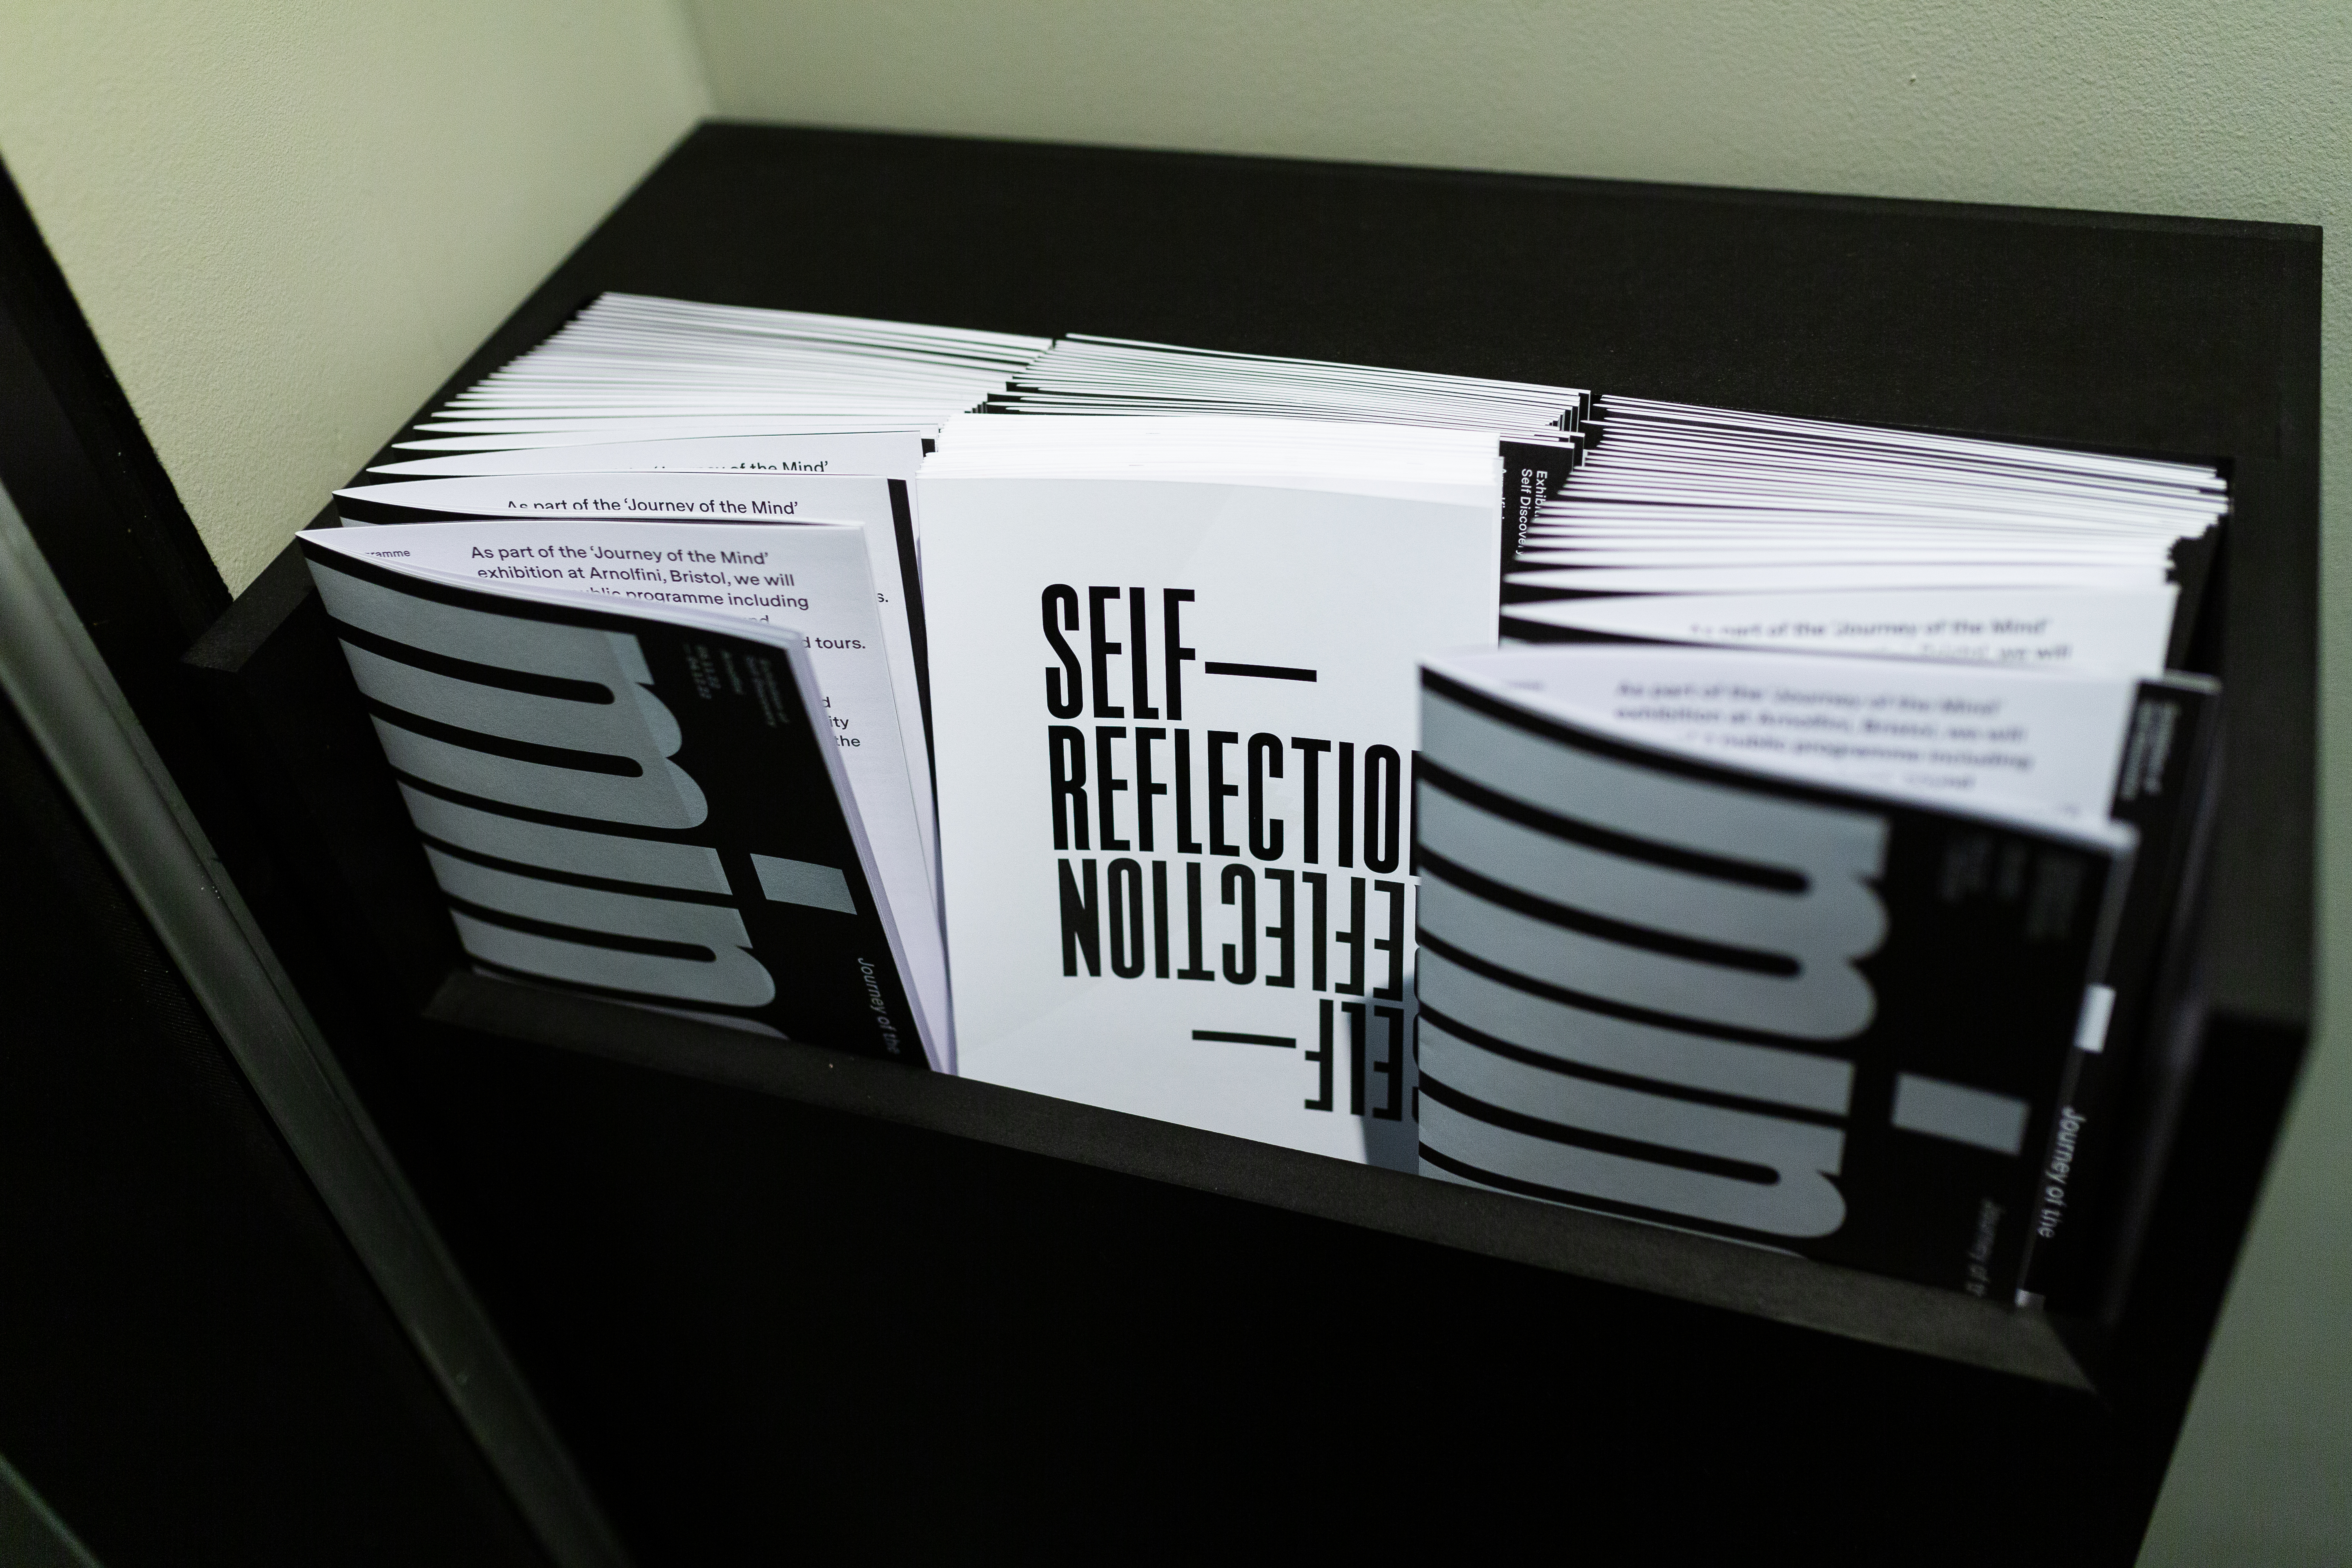 A photograph of a a display case full of Journey of the Mind and Self Reflection booklets.